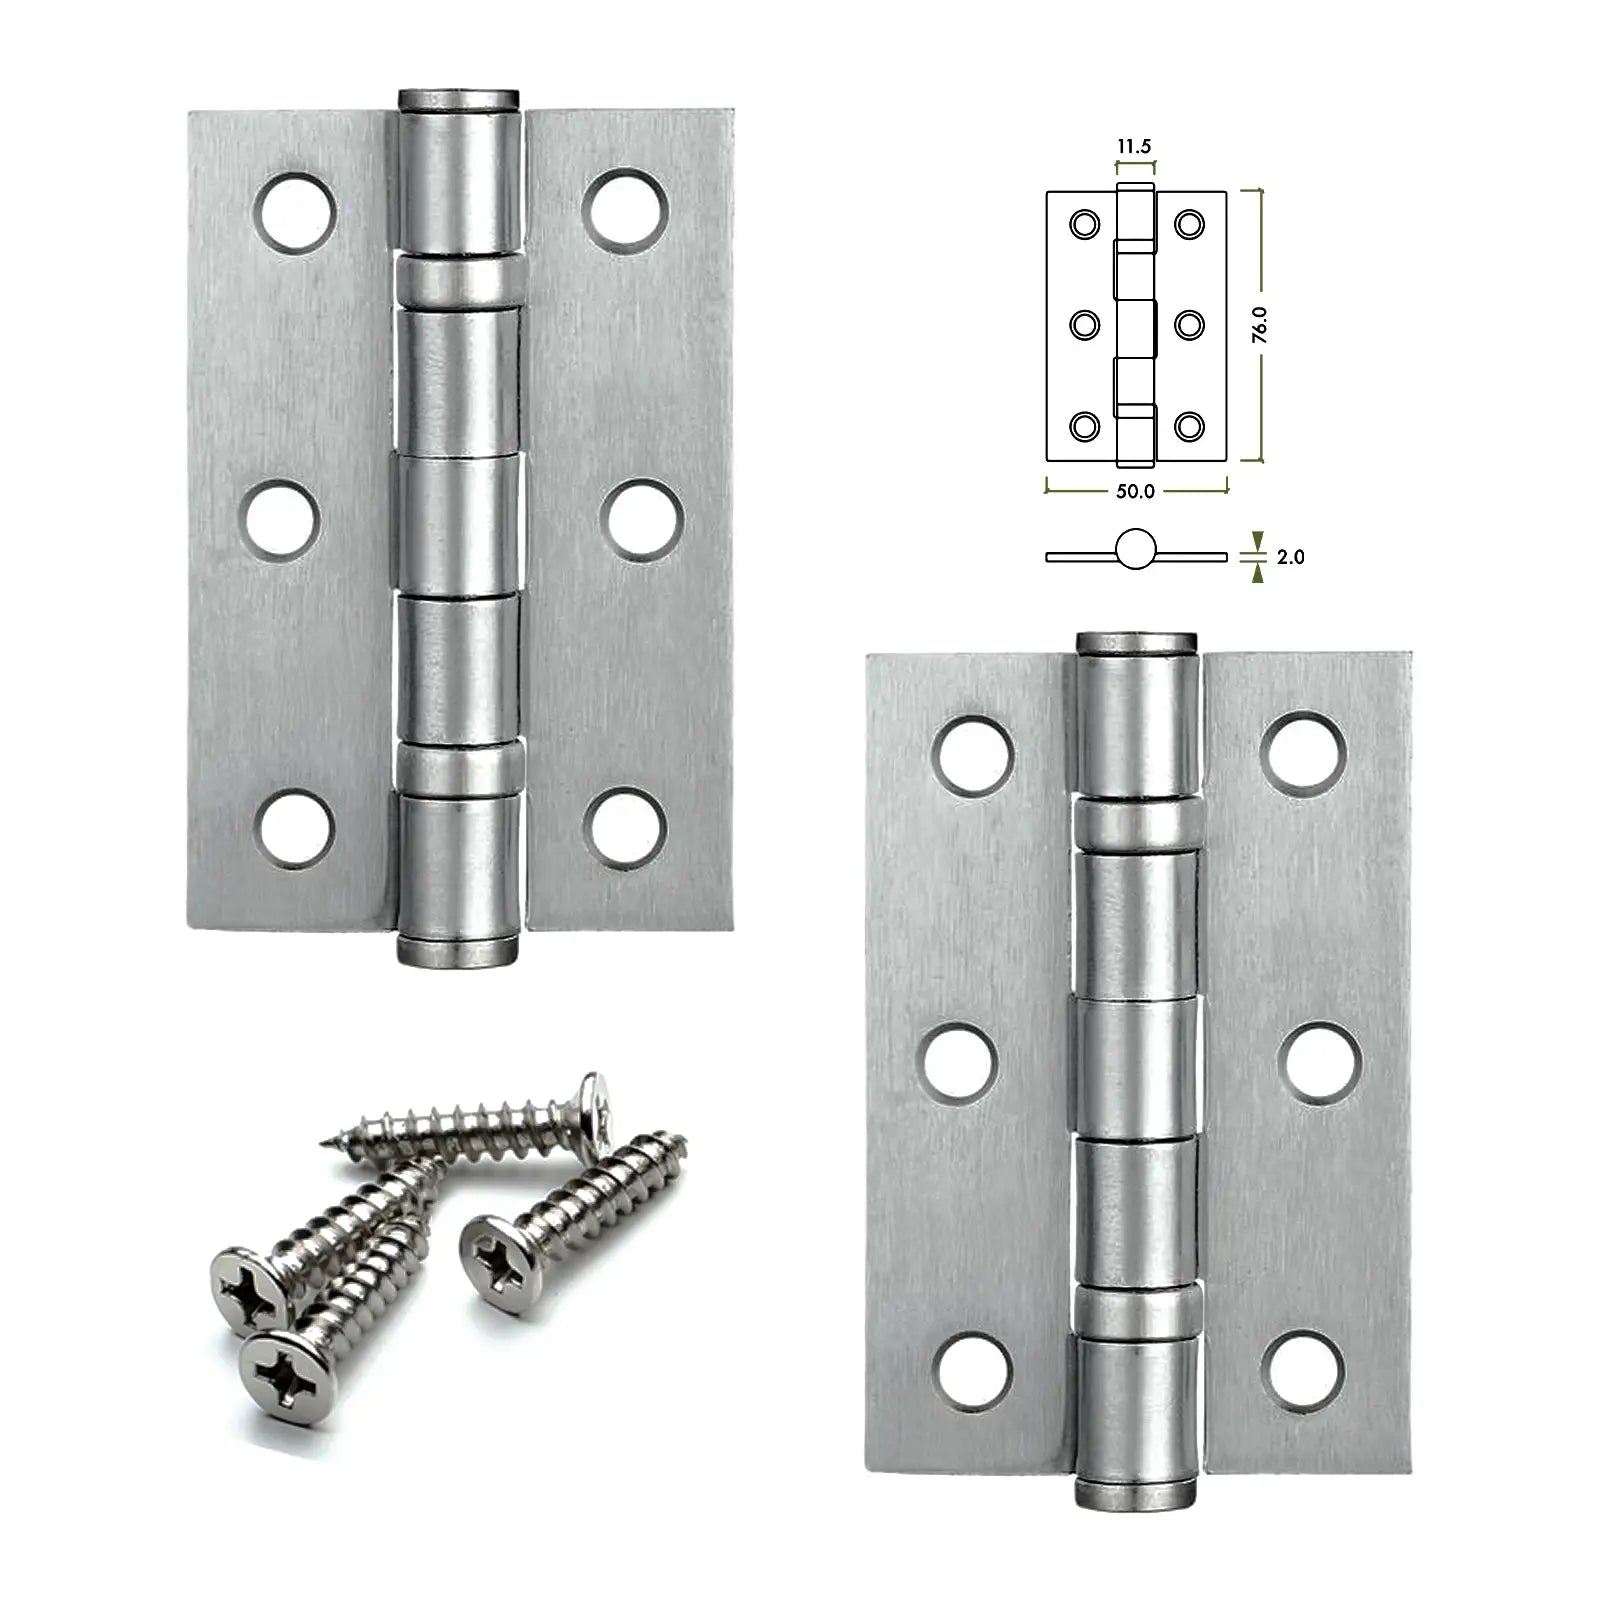 Ball Bearing Fire Rated Door Hinges - 76mm - Pair - Satin Nickel - Decor And Decor